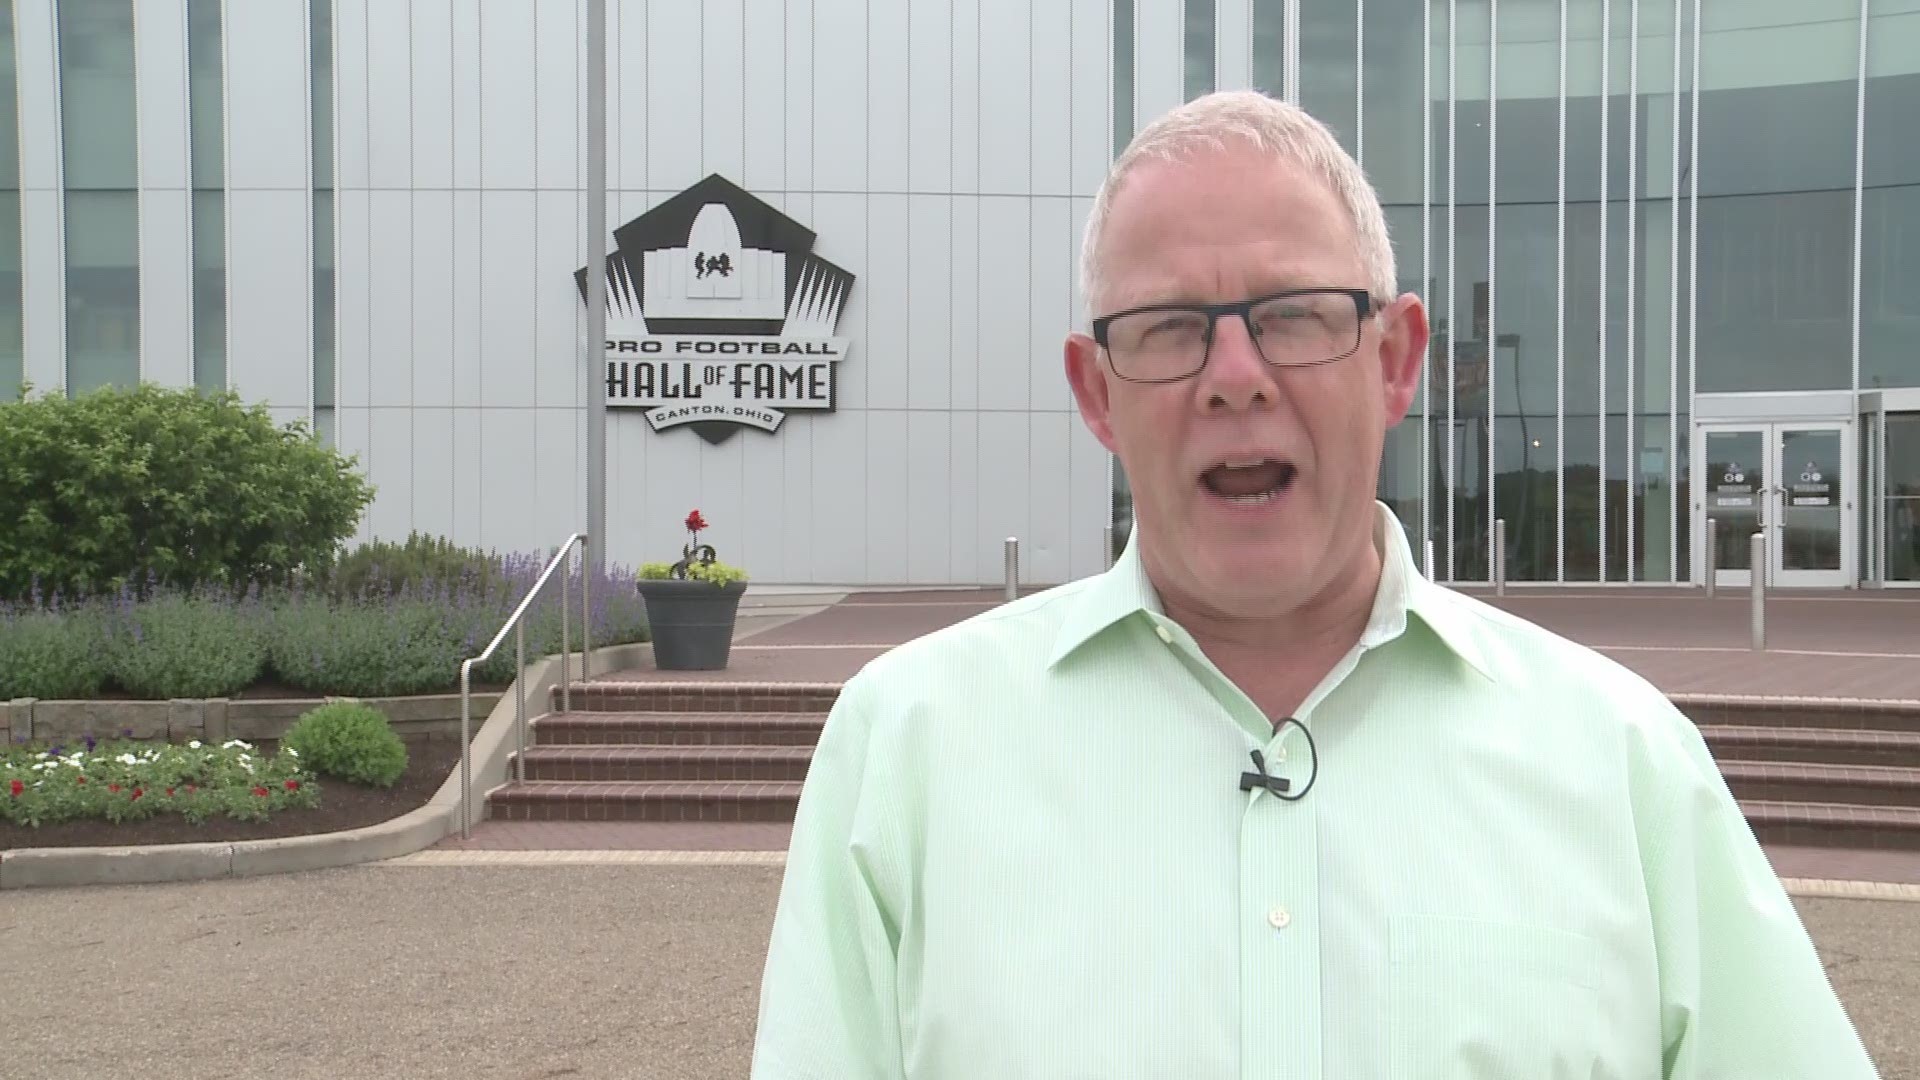 How will Cleveland receiving the 2021 NFL Draft affect the Pro Football Hall of Fame in Canton? We spoke with Pete Fierle of the Hall of Fame to find out.